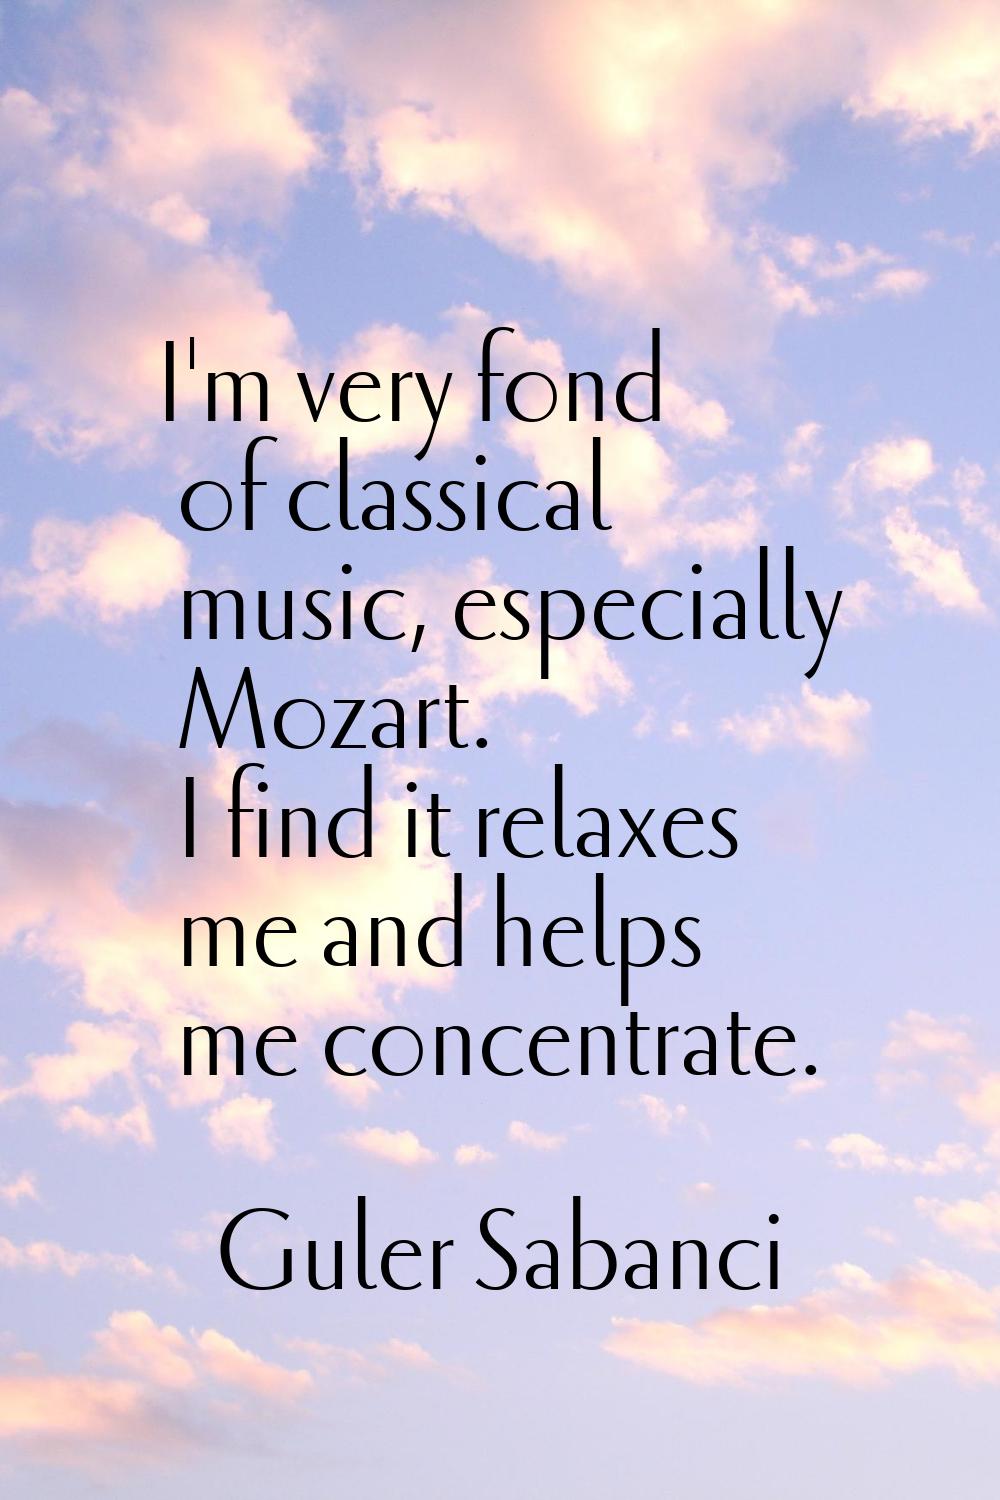 I'm very fond of classical music, especially Mozart. I find it relaxes me and helps me concentrate.